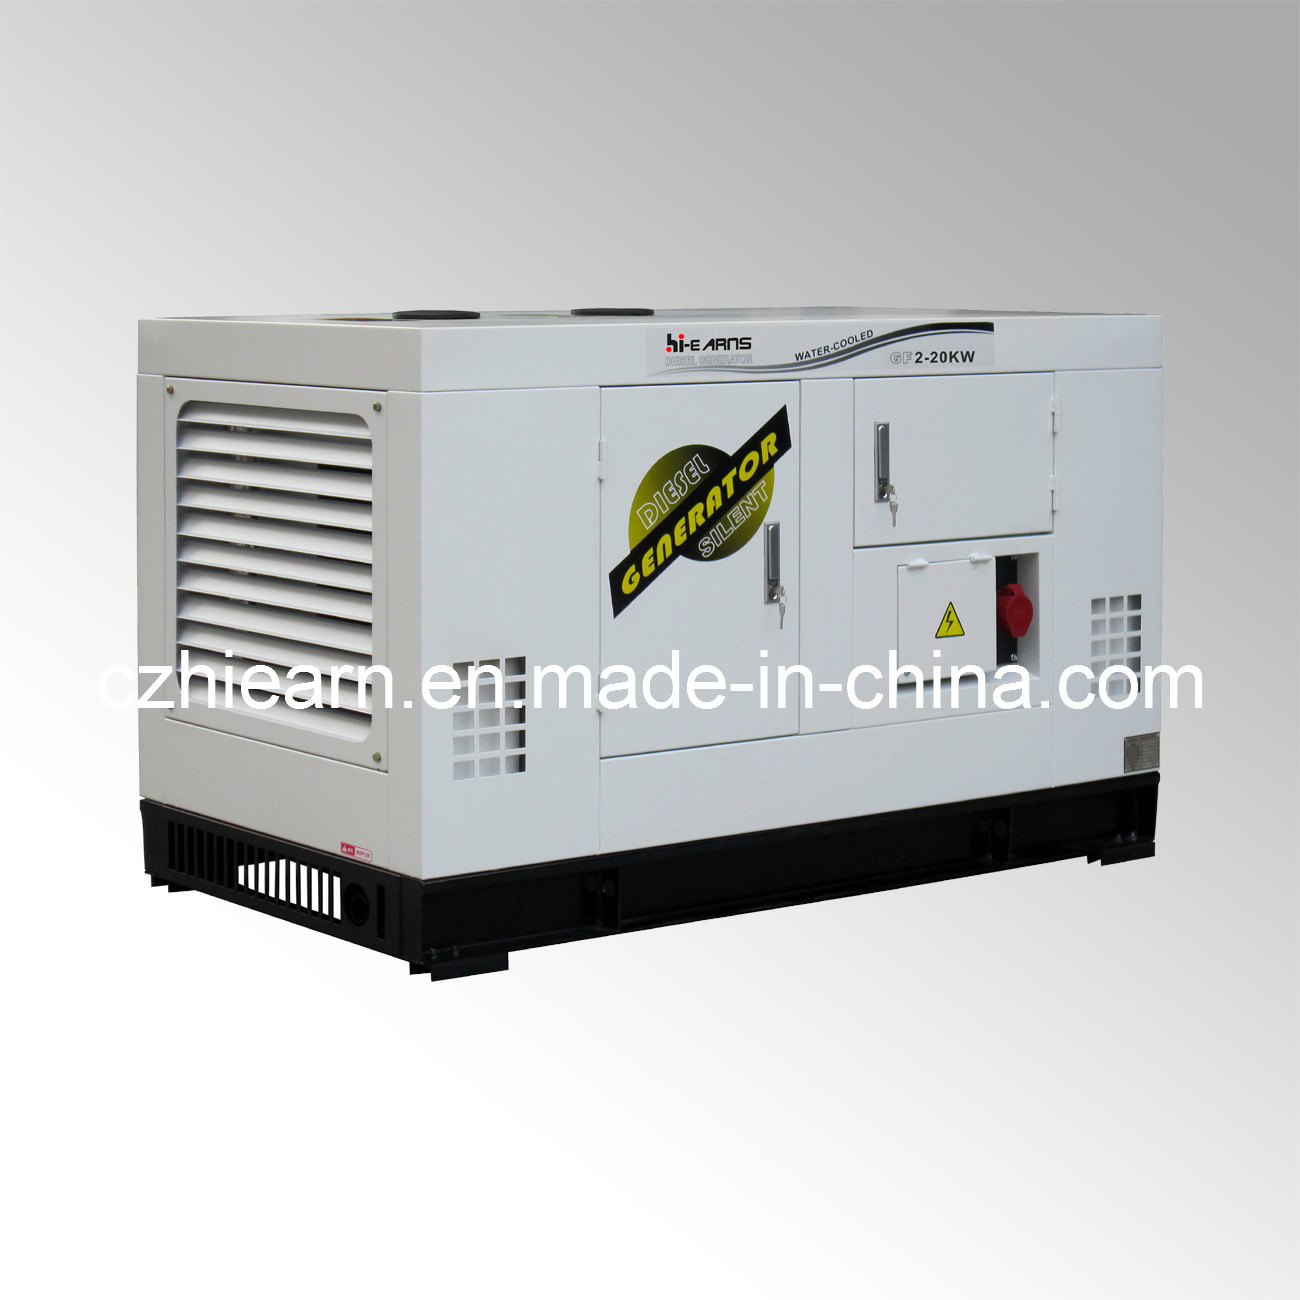 Water-Cooled Diesel Generator with Chinese Quanchai Engine (GF2-20KW)